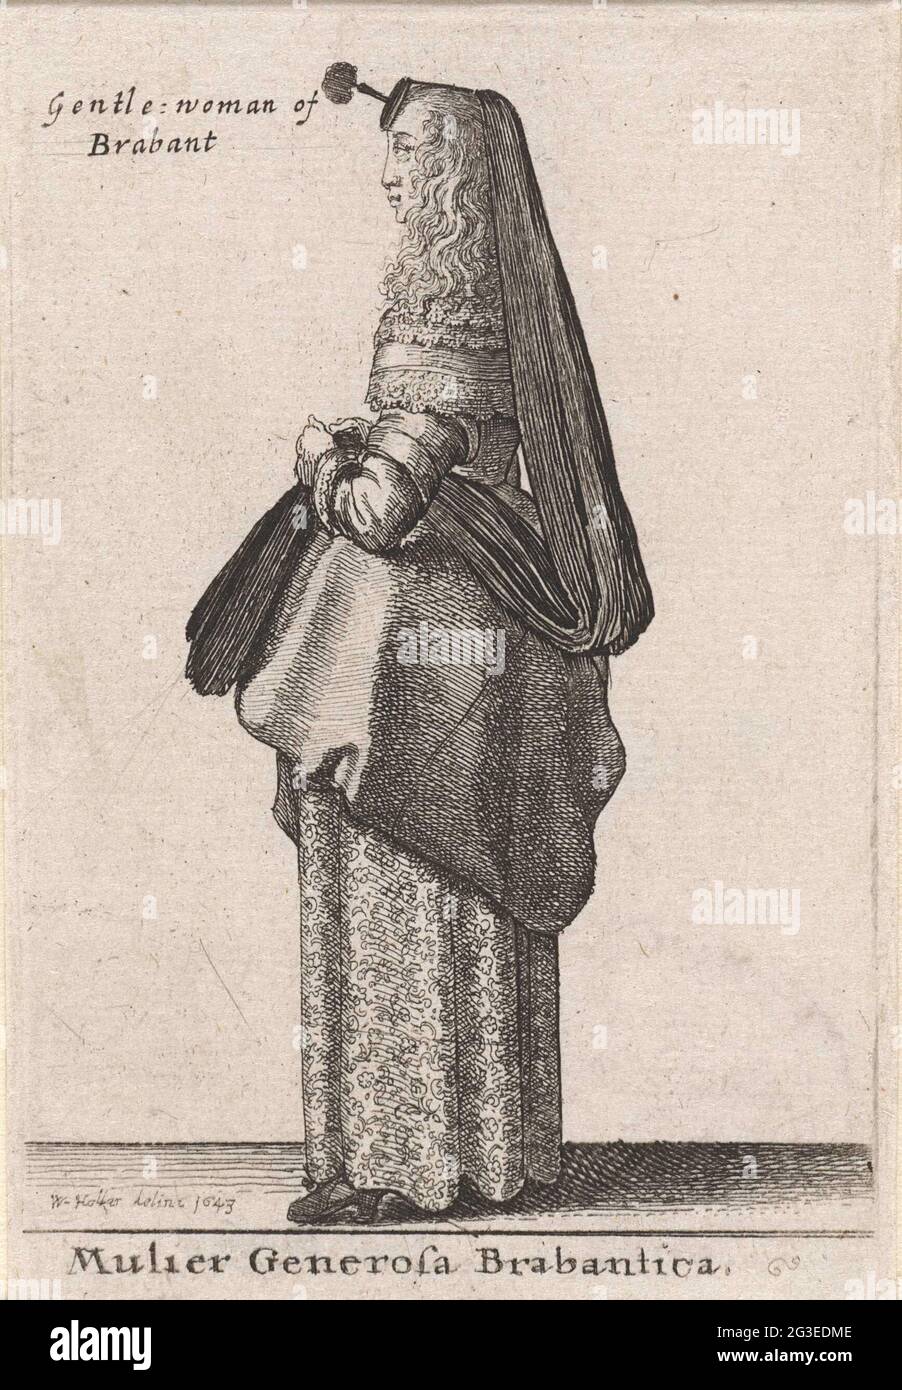 Mulier Generosa Brabantica / Gentle Woman or Brabant; Theatrum Mechanic; European women in traditional costume. Woman from Brabant, in profile to the left, with long hair on the shoulders. Shoulder collar with lace and a long veil (hood ??) with 'Houpette' on the head. The derring has been suspended into knee height, so that the insert is visible. Shoes with heels. Stock Photo